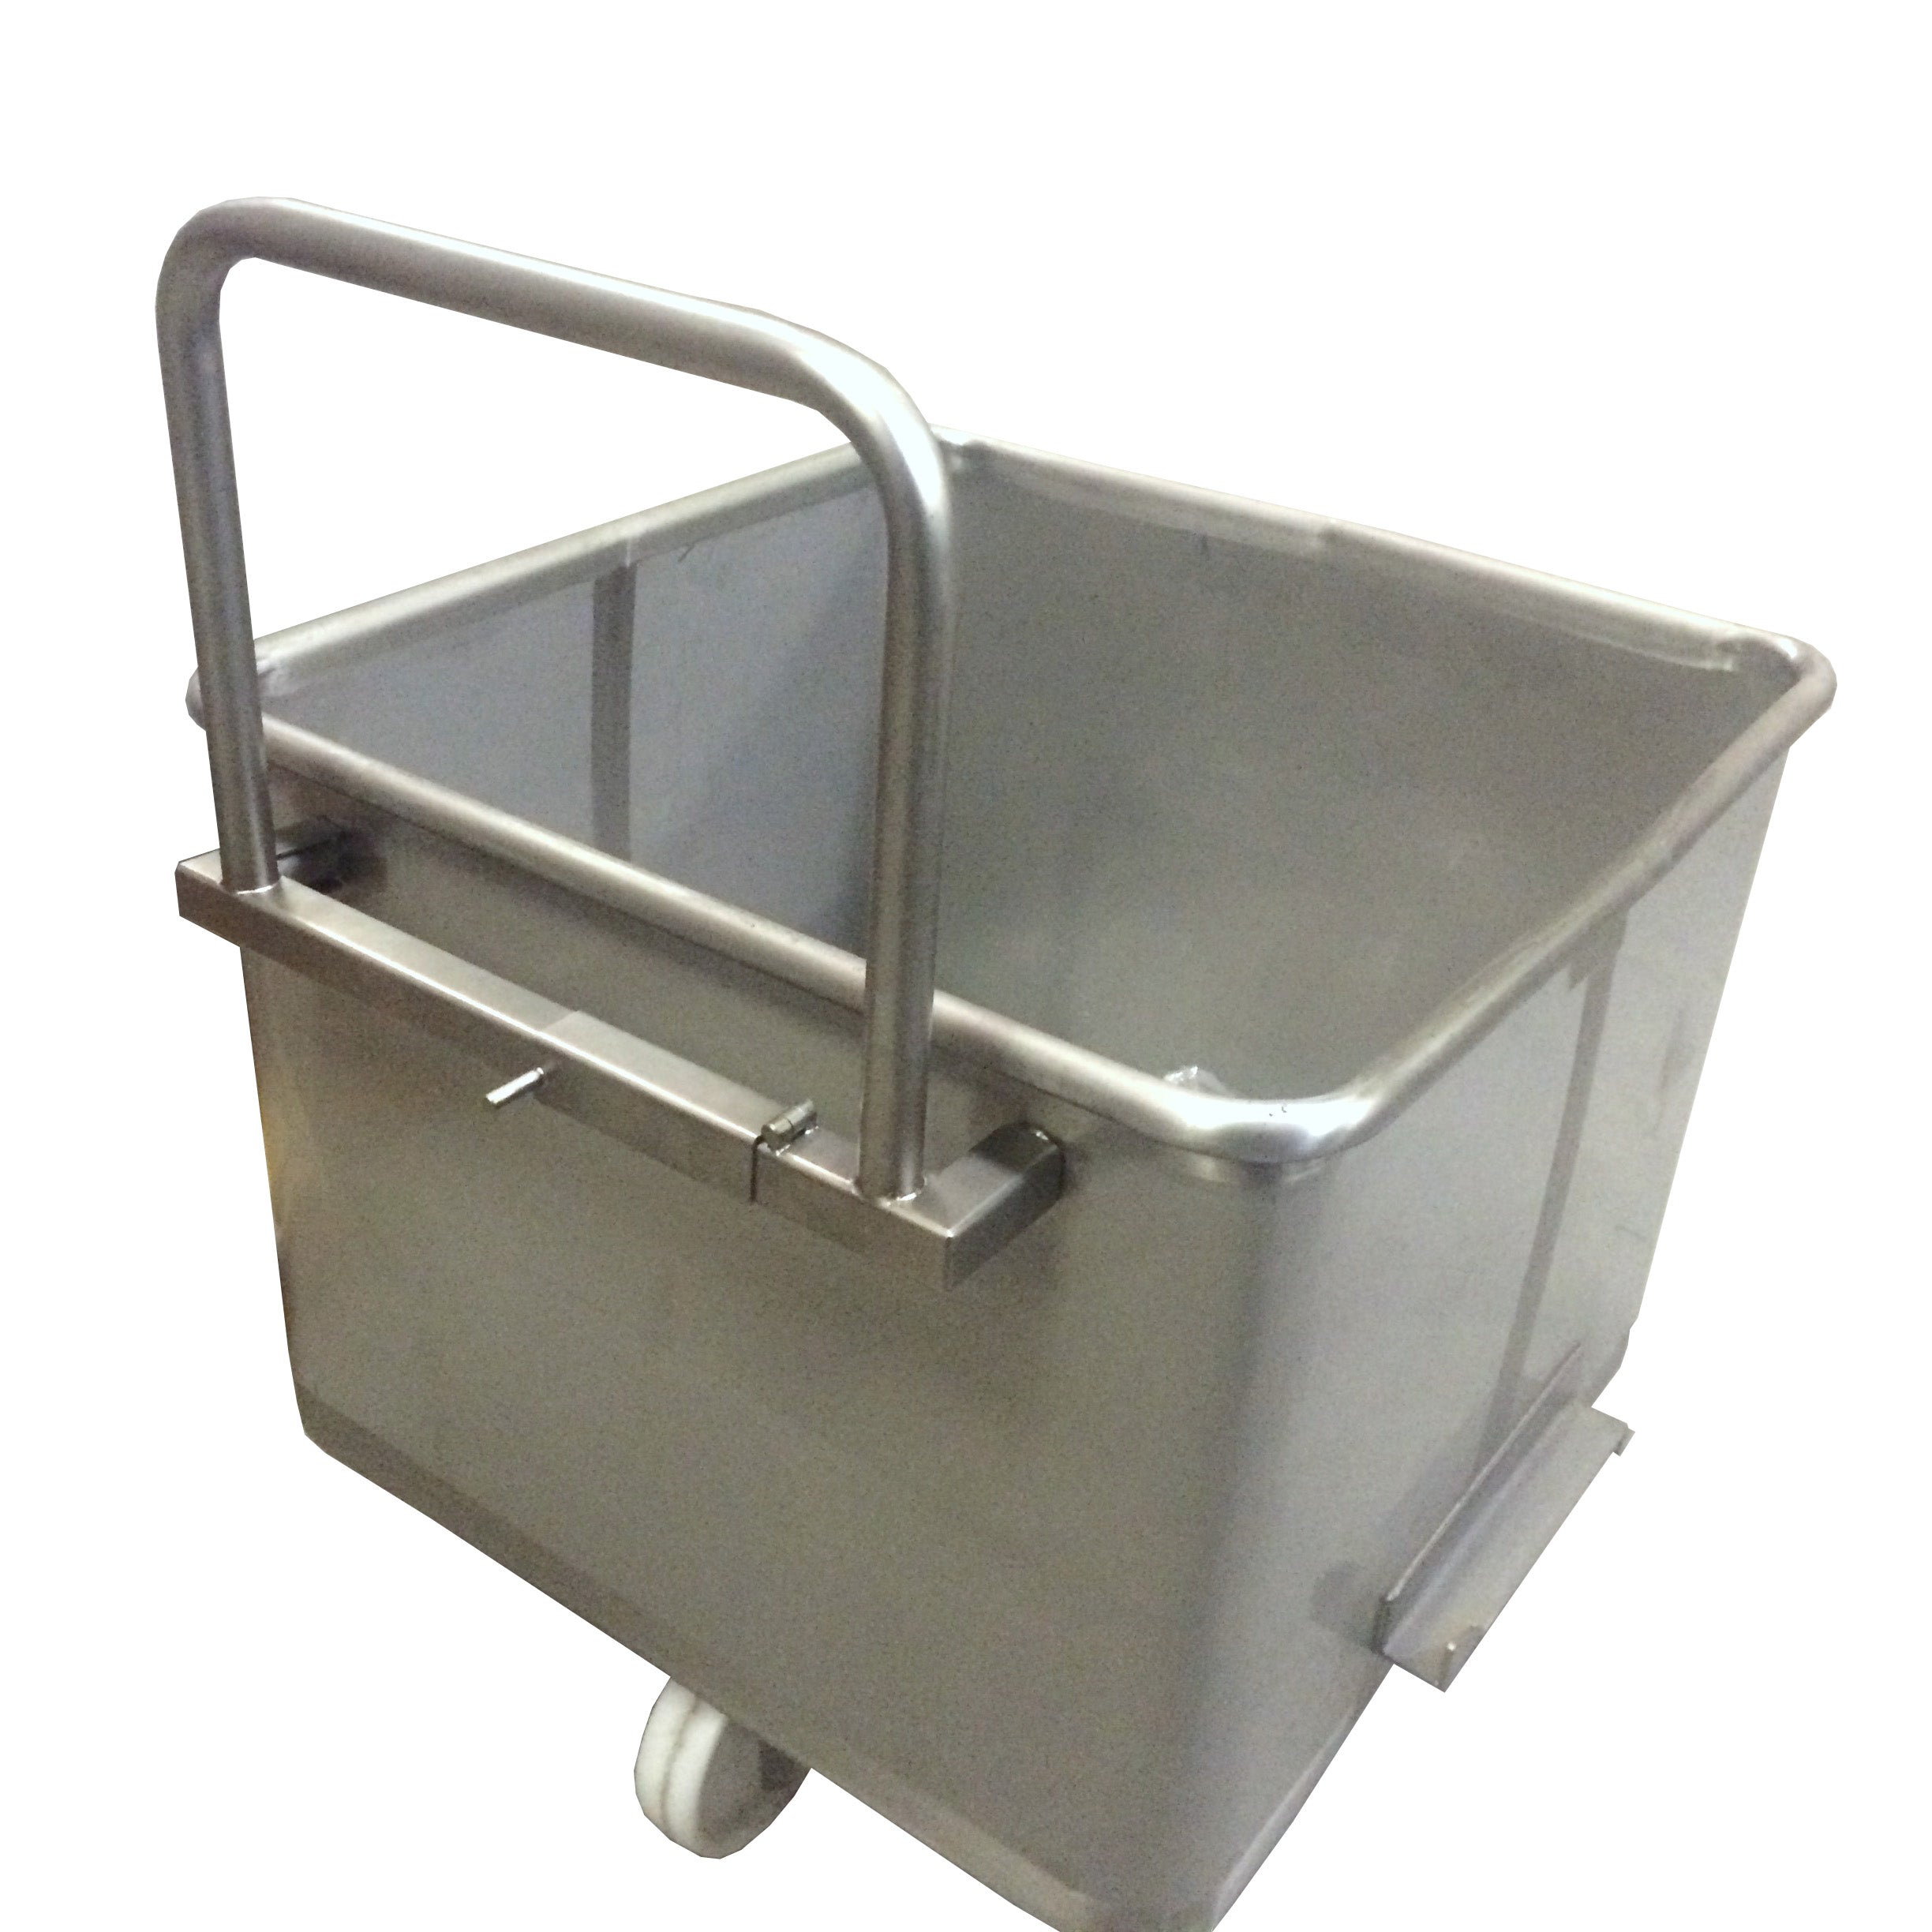 Tote bin extended push handle